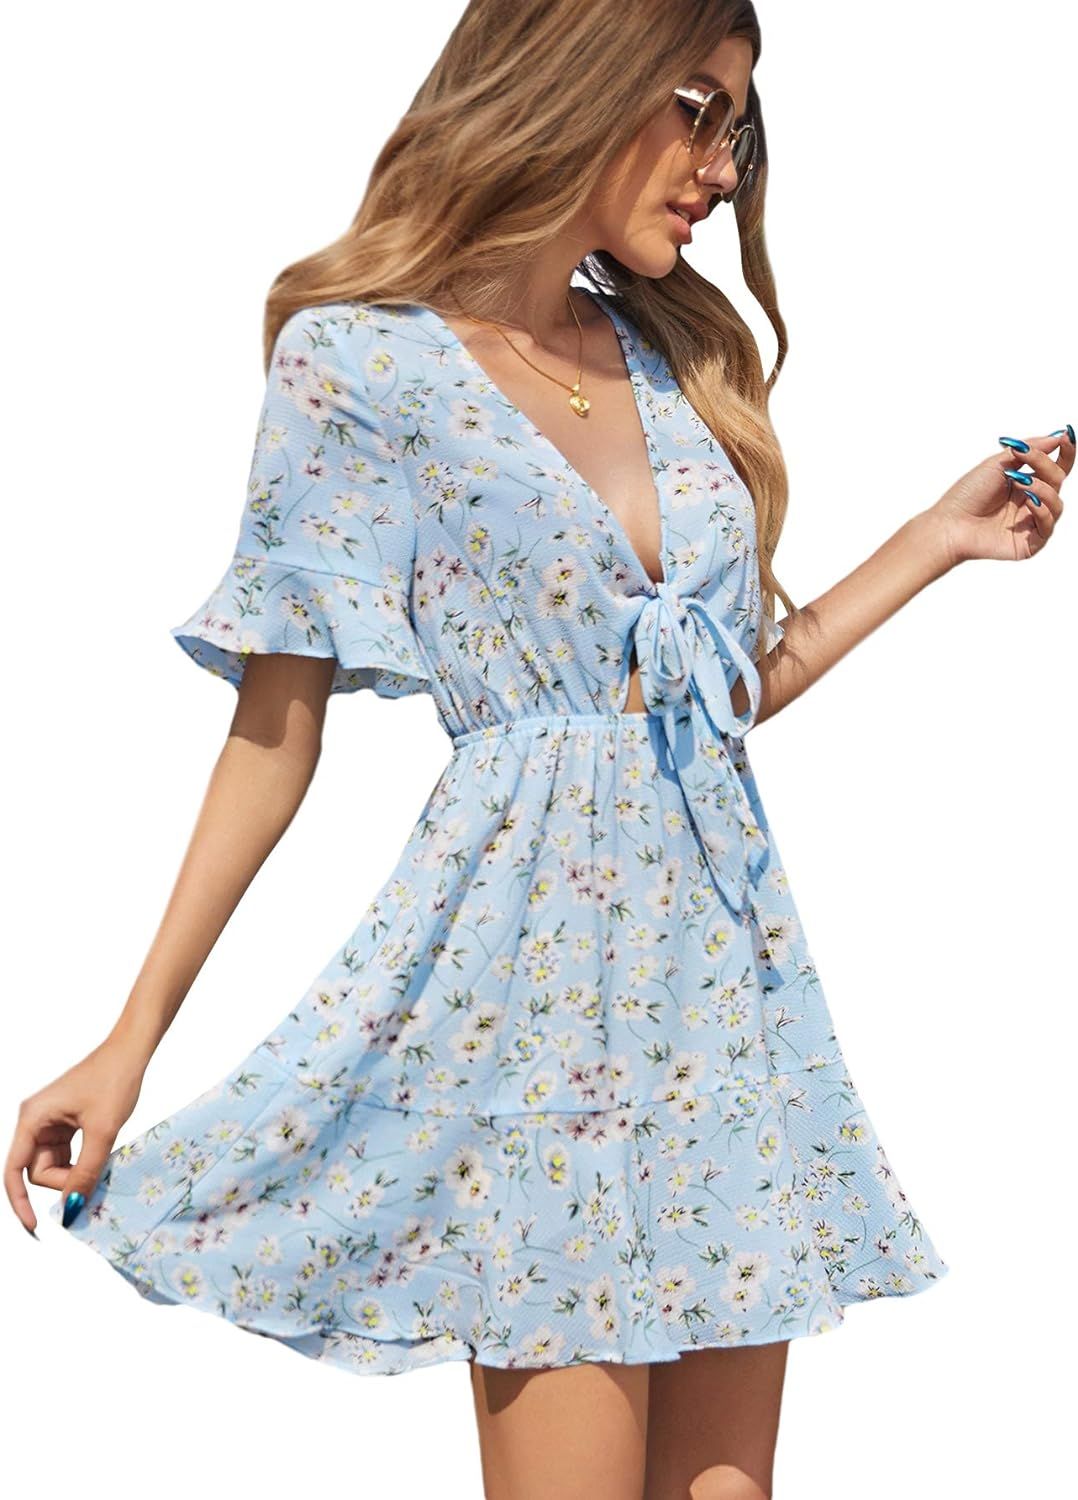 SheIn Women's Floral Tie Front Ruffle Mini Dress V Neck Short Sleeve A Line Flare Dresses | Amazon (US)